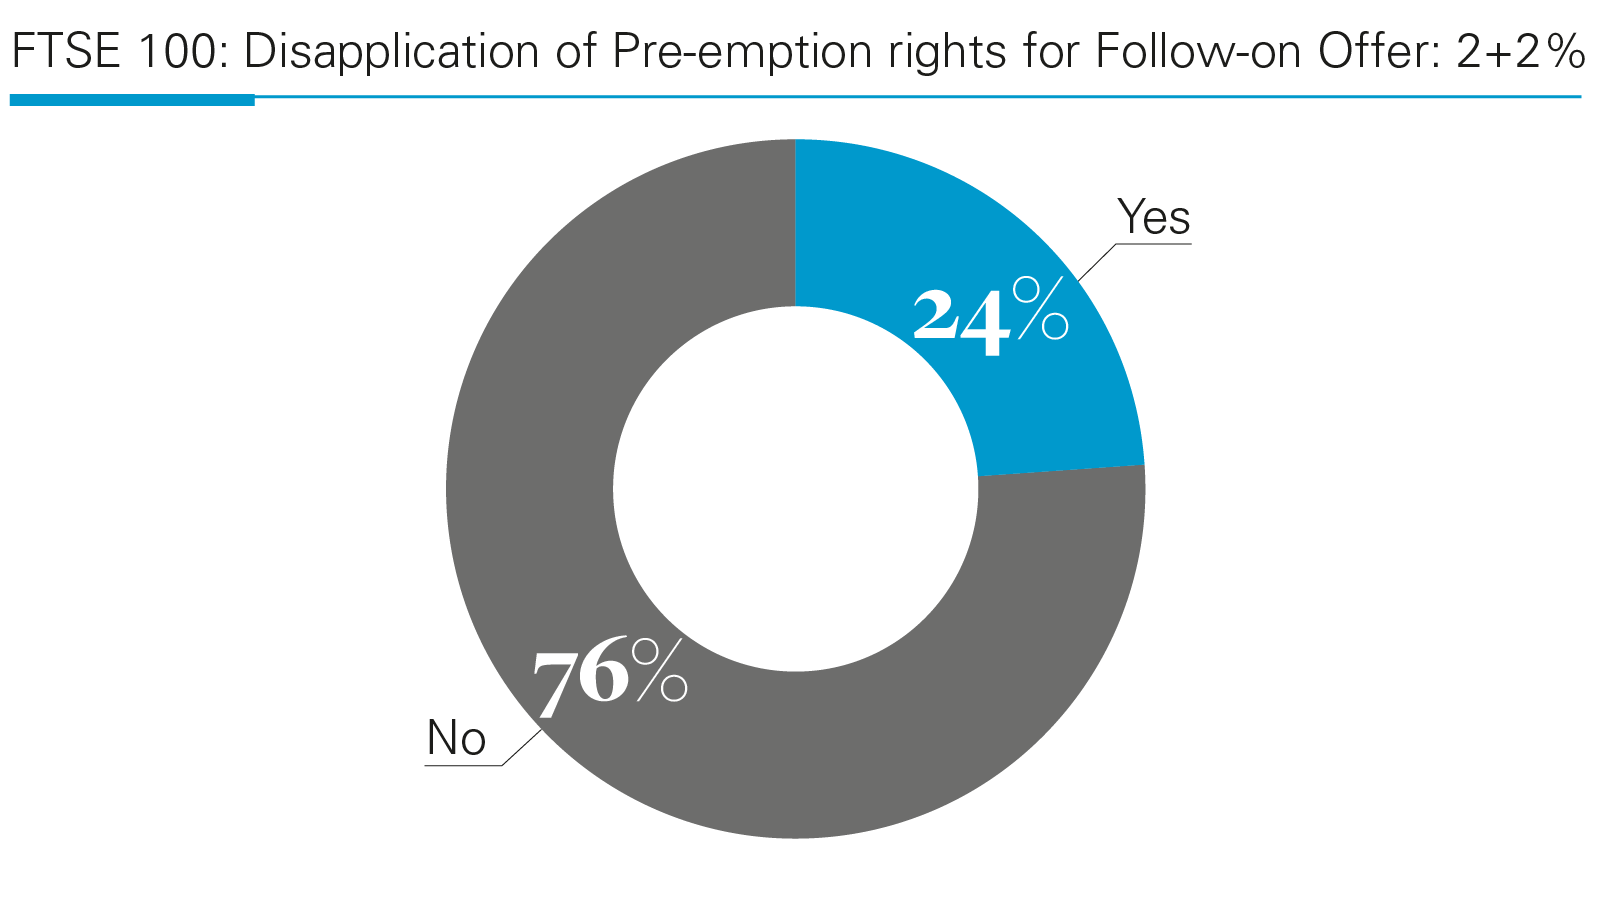 FTSE 100: Disapplication of Pre-emption rights for Follow-on Offer: 2+2% 